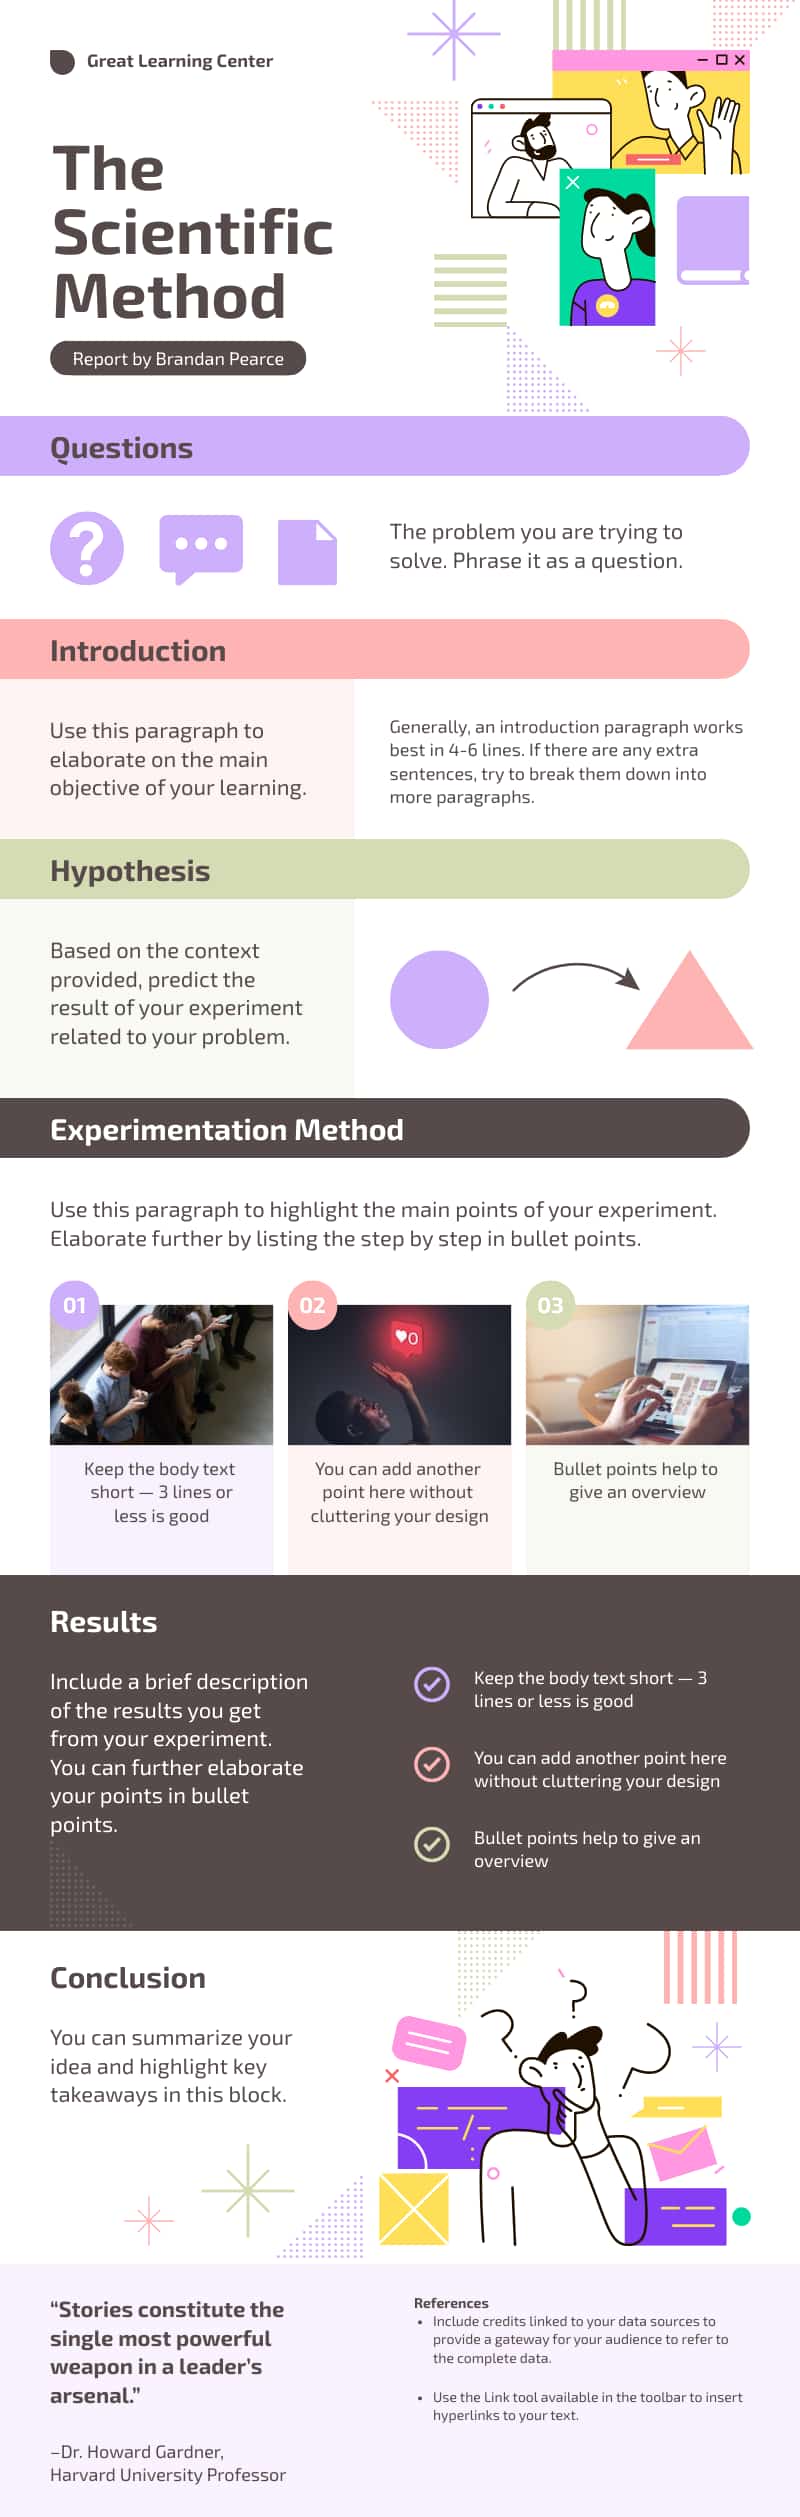 the scientific method one-pager